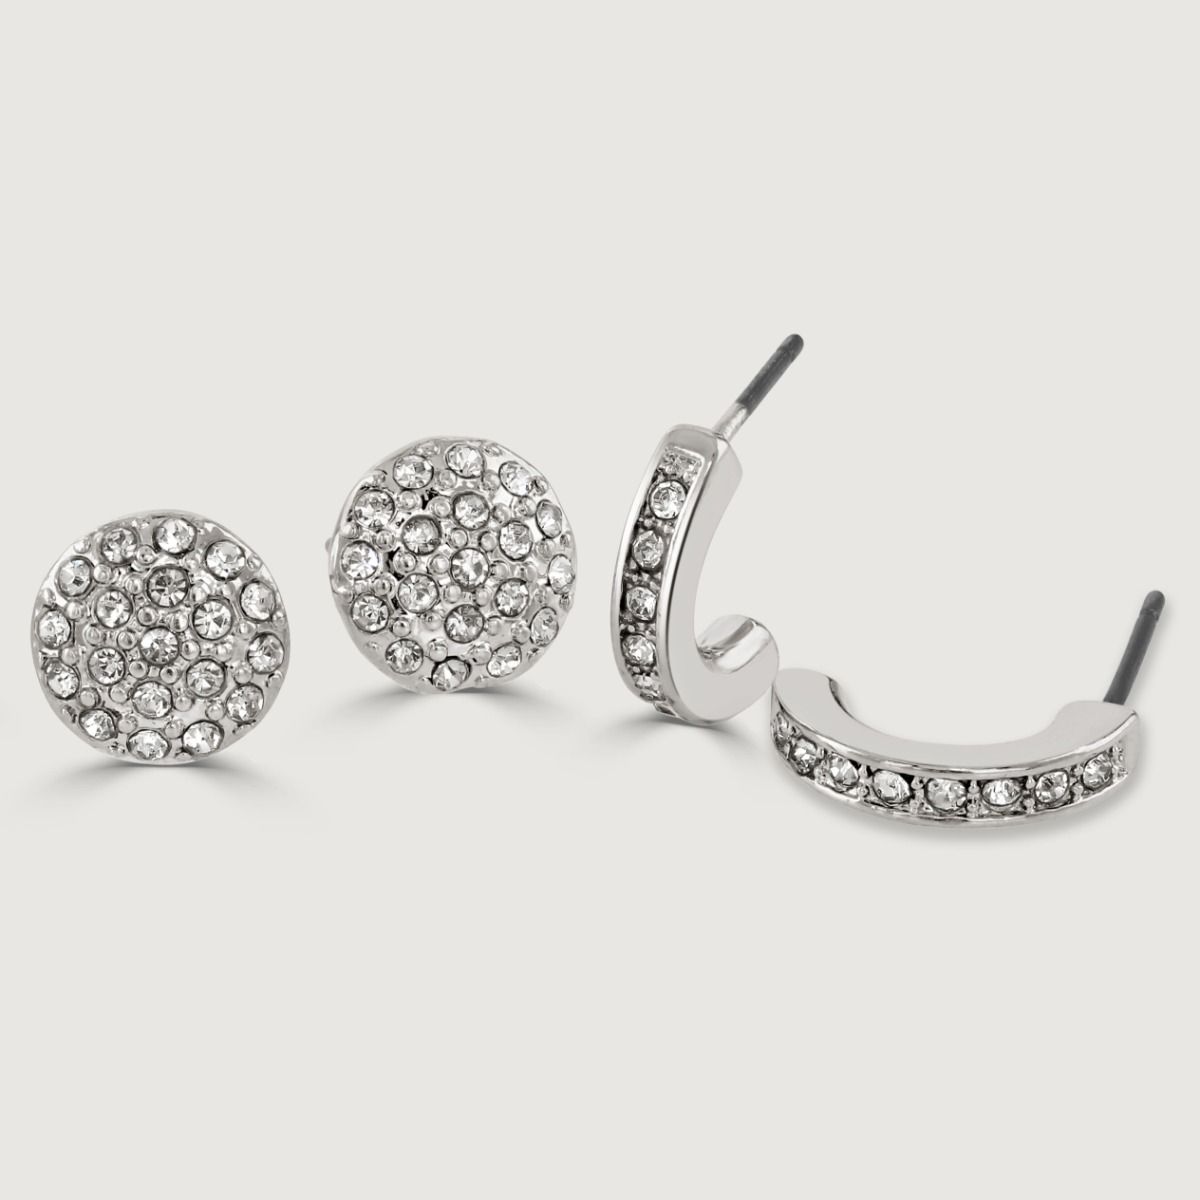 Upgrade your earring collection with this dazzling Rhodium Four Piece Pack. It features a mix of timeless elegance and contemporary flair, including pearl studs for a touch of sophistication, chic hoop earrings for a trendy look, and sparkling crystal ear